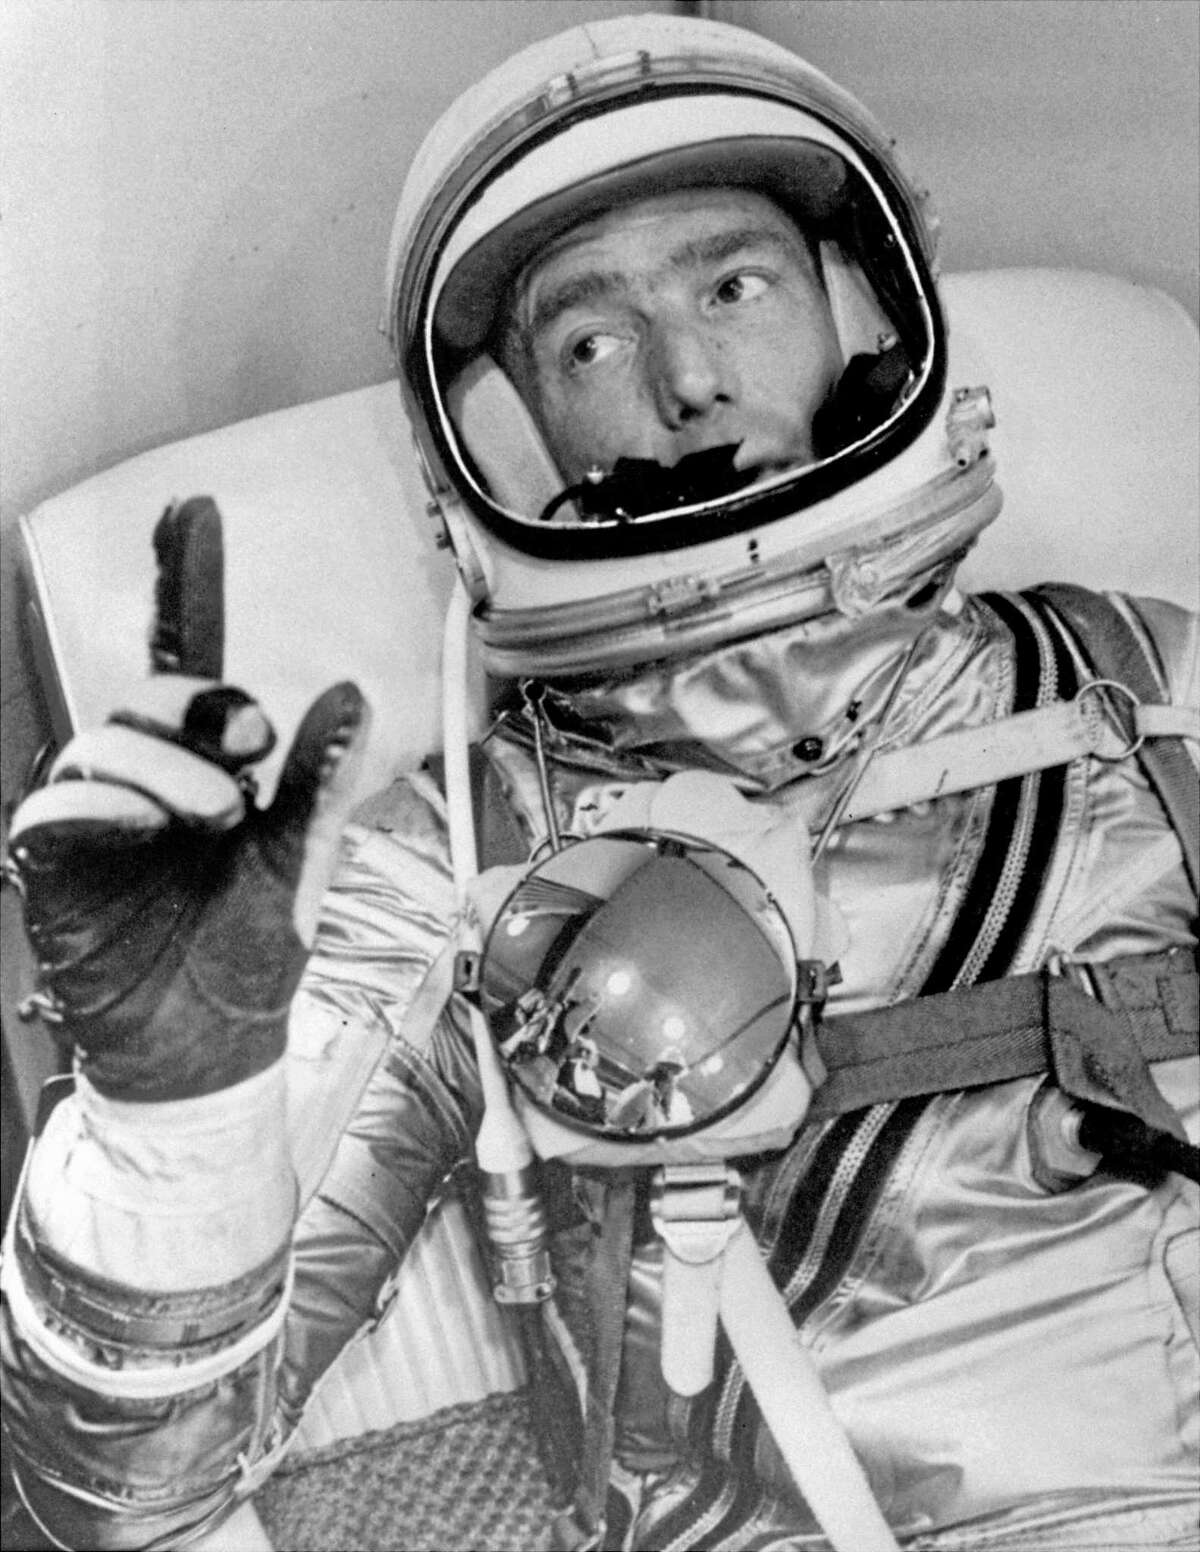 FILE - In this May 24, 1962 file photo provided by NASA, astronaut Scott Carpenter gestures with one hand after donning his space suit in Hangar S prior to being shot into orbit at Cape Canaveral, Fla. Carpenter, the second American to orbit the Earth and first person to explore both the heights of space and depths of the ocean, died Thursday, Oct. 10, 2013 after a stroke. He was 88. (AP photo/NASA, File)